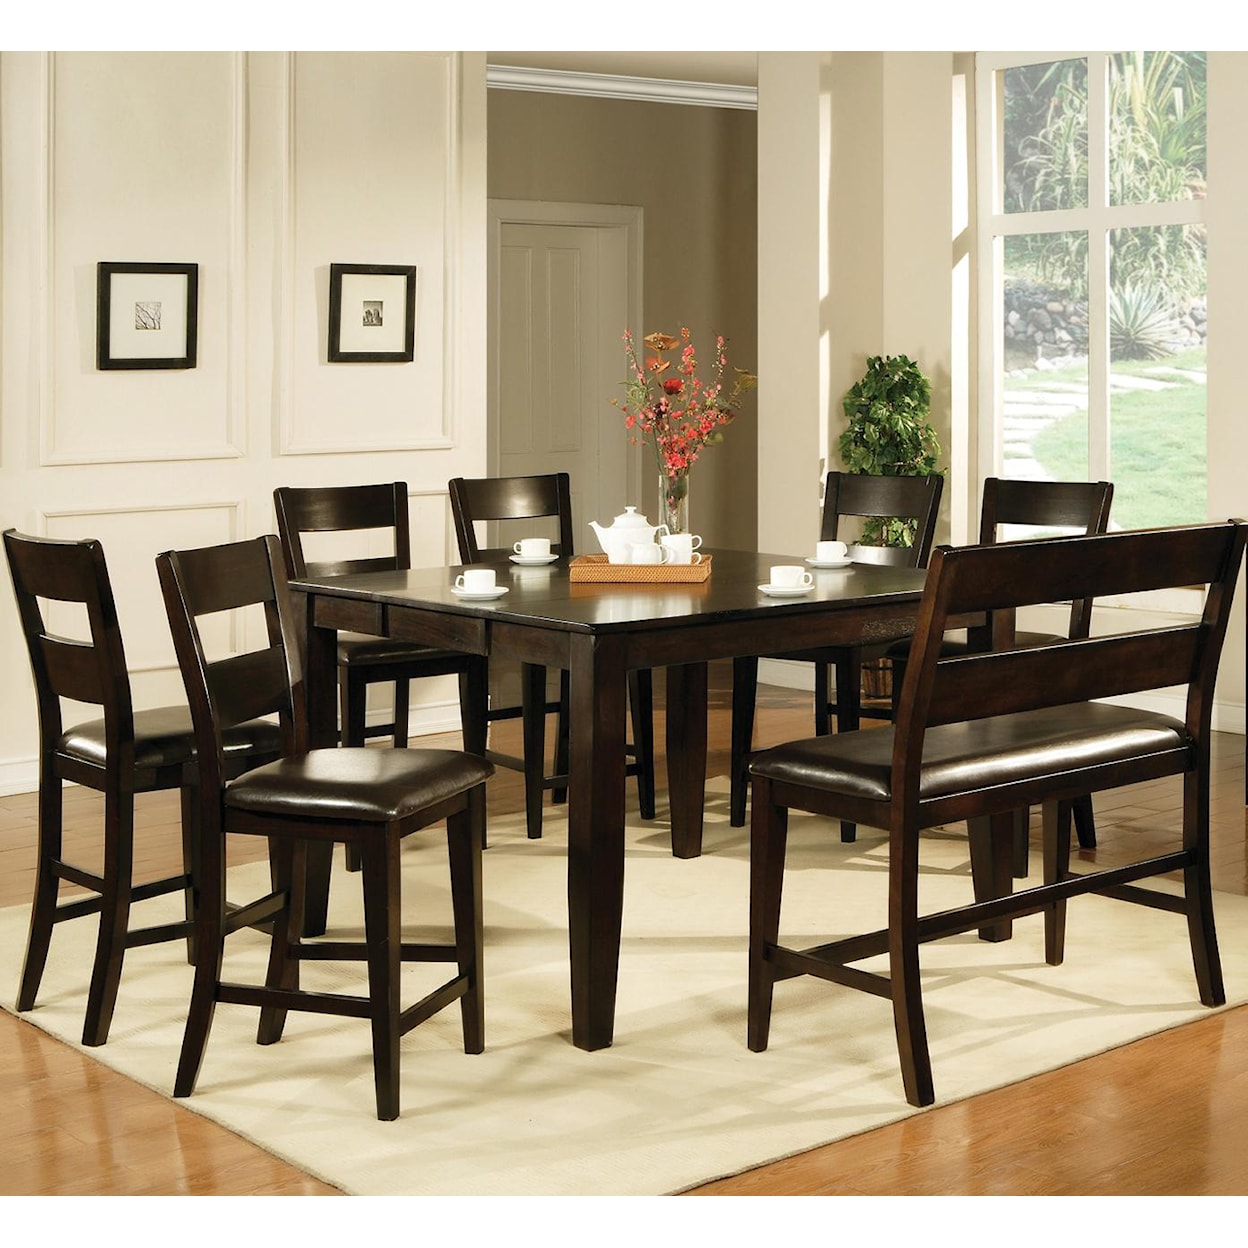 Prime Victoria  8 Piece Counter Height Dining Set